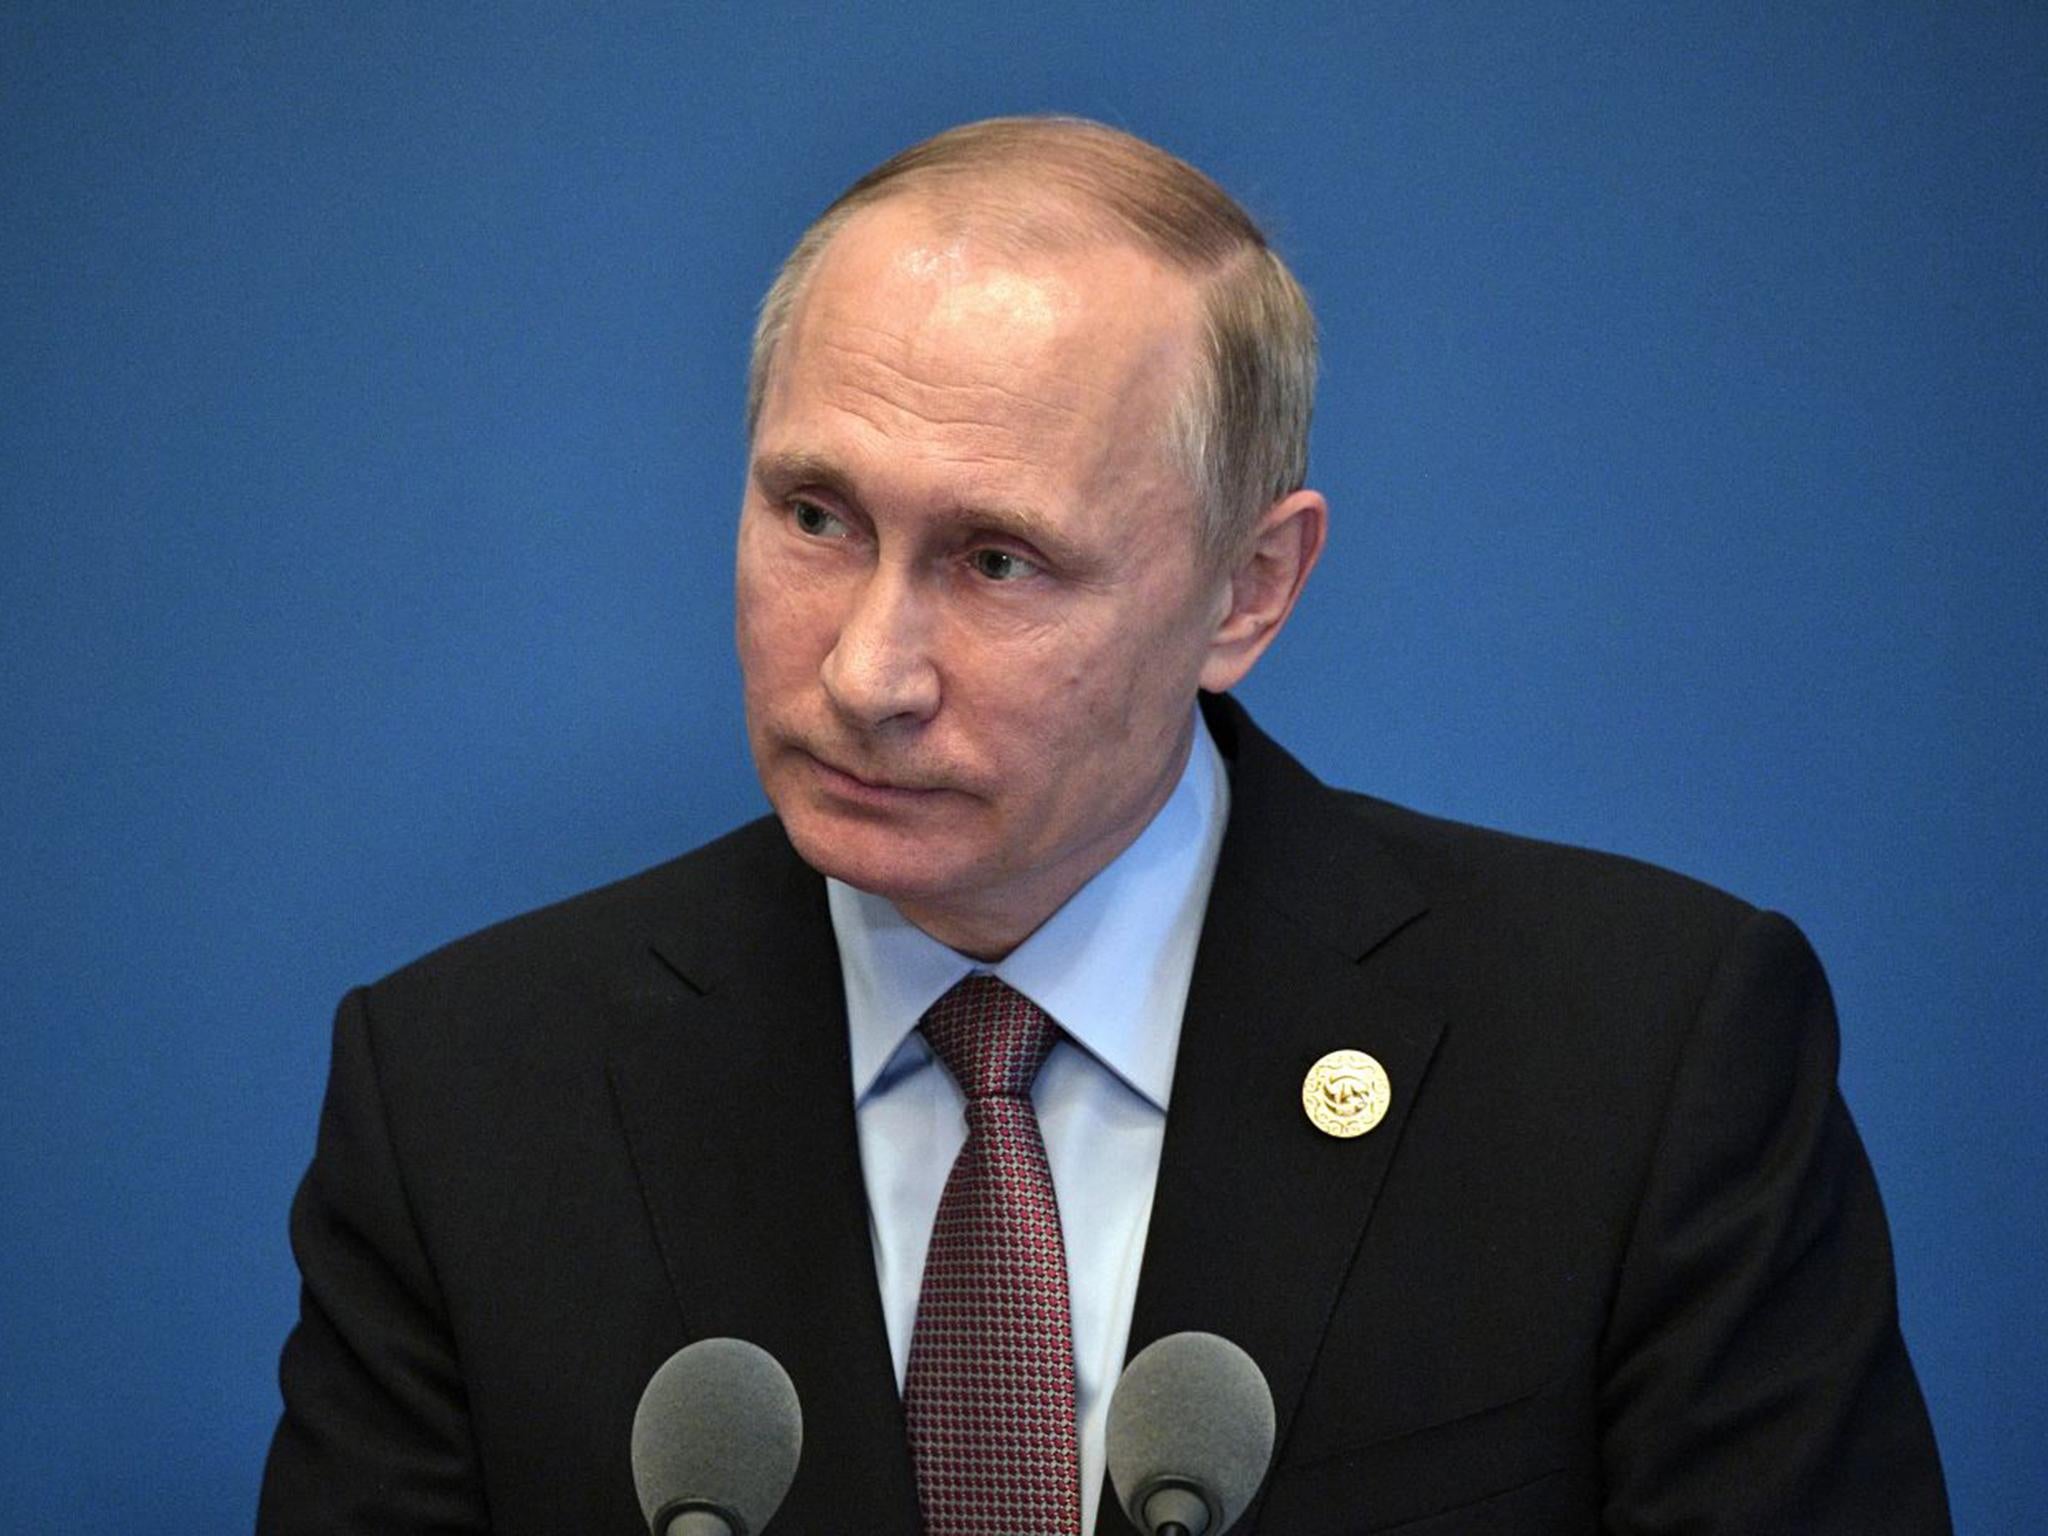 Russian President Vladimir Putin speaking to the media at the China National Convention Center